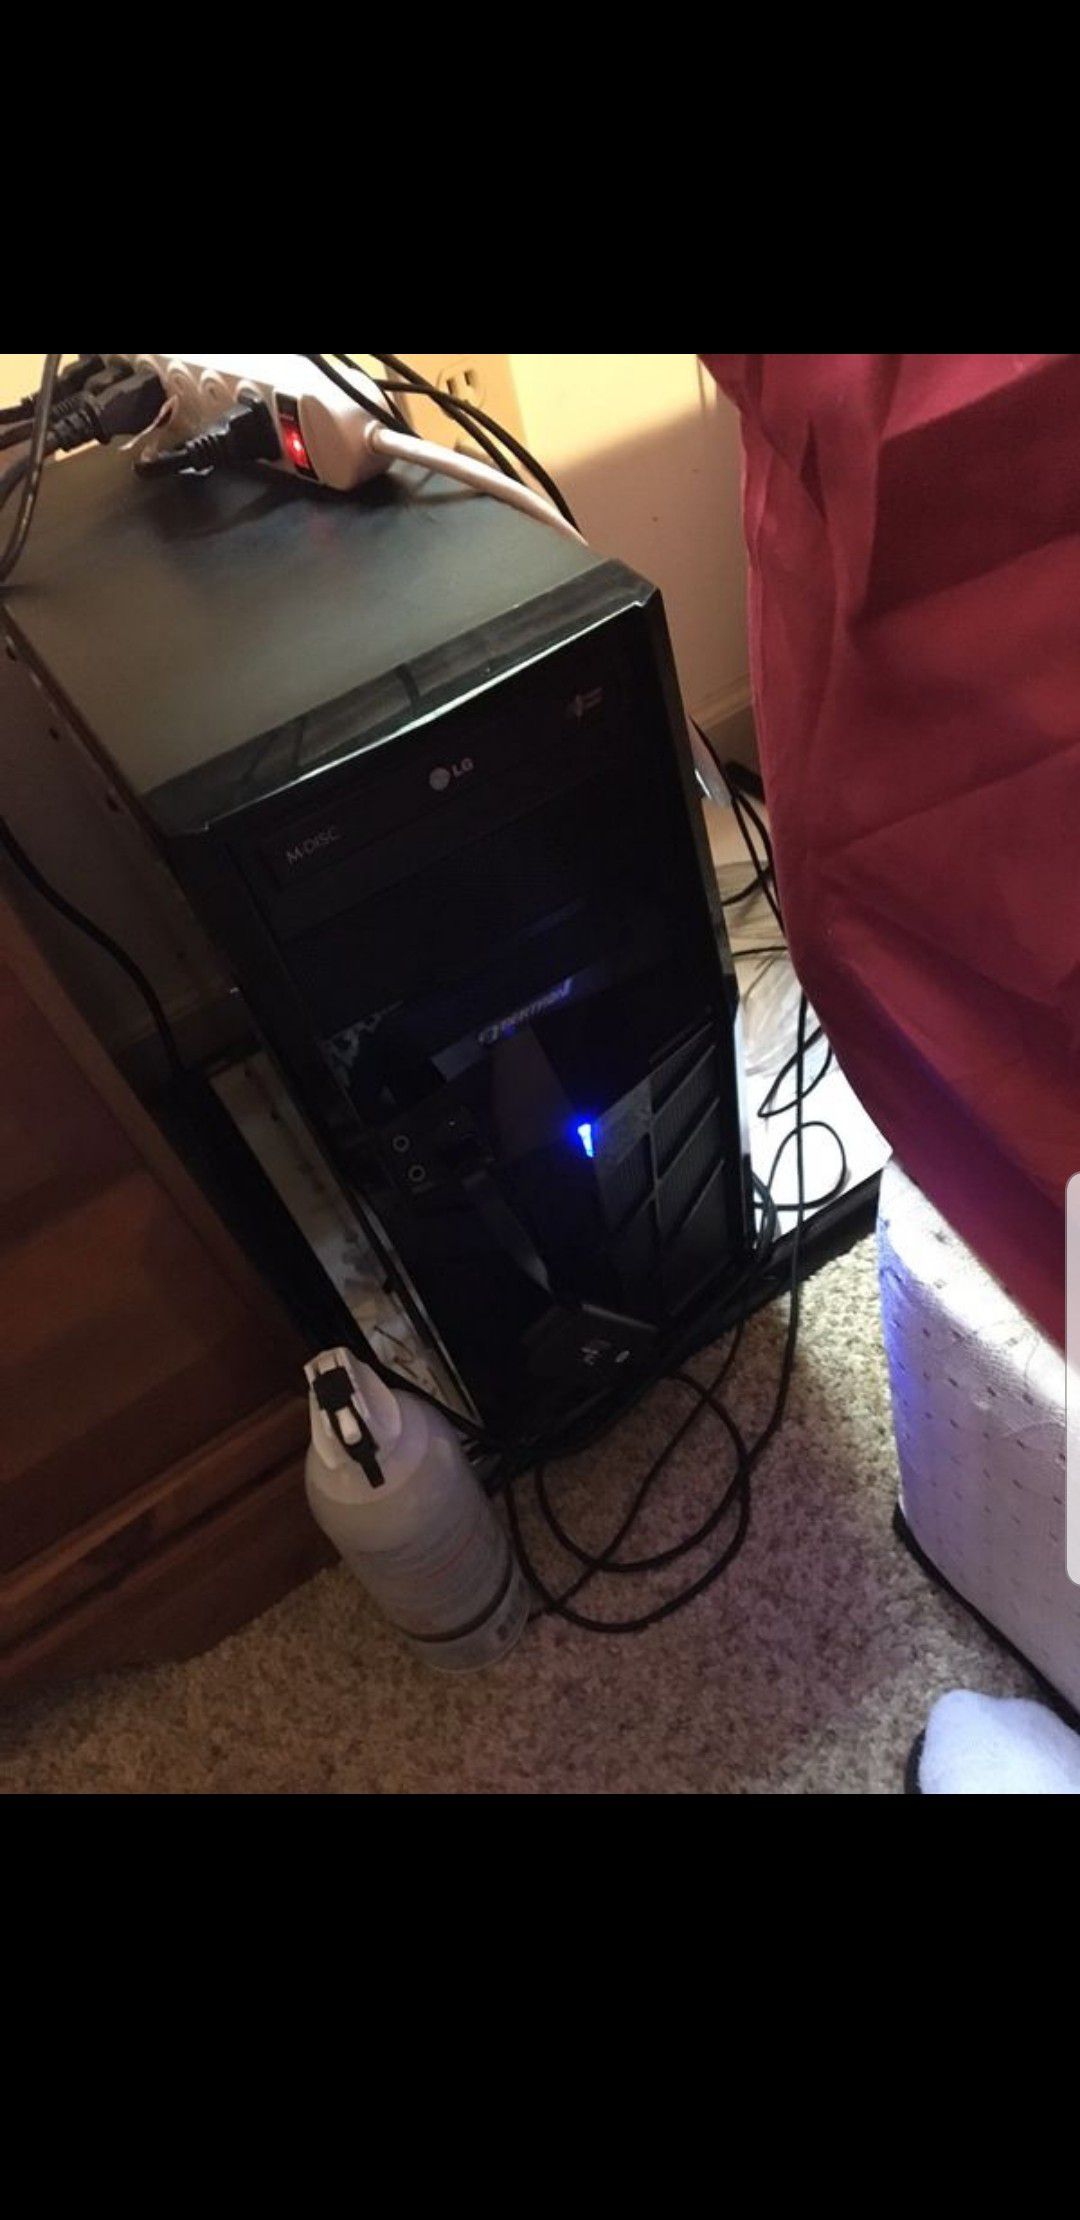 NEW great gaming pc